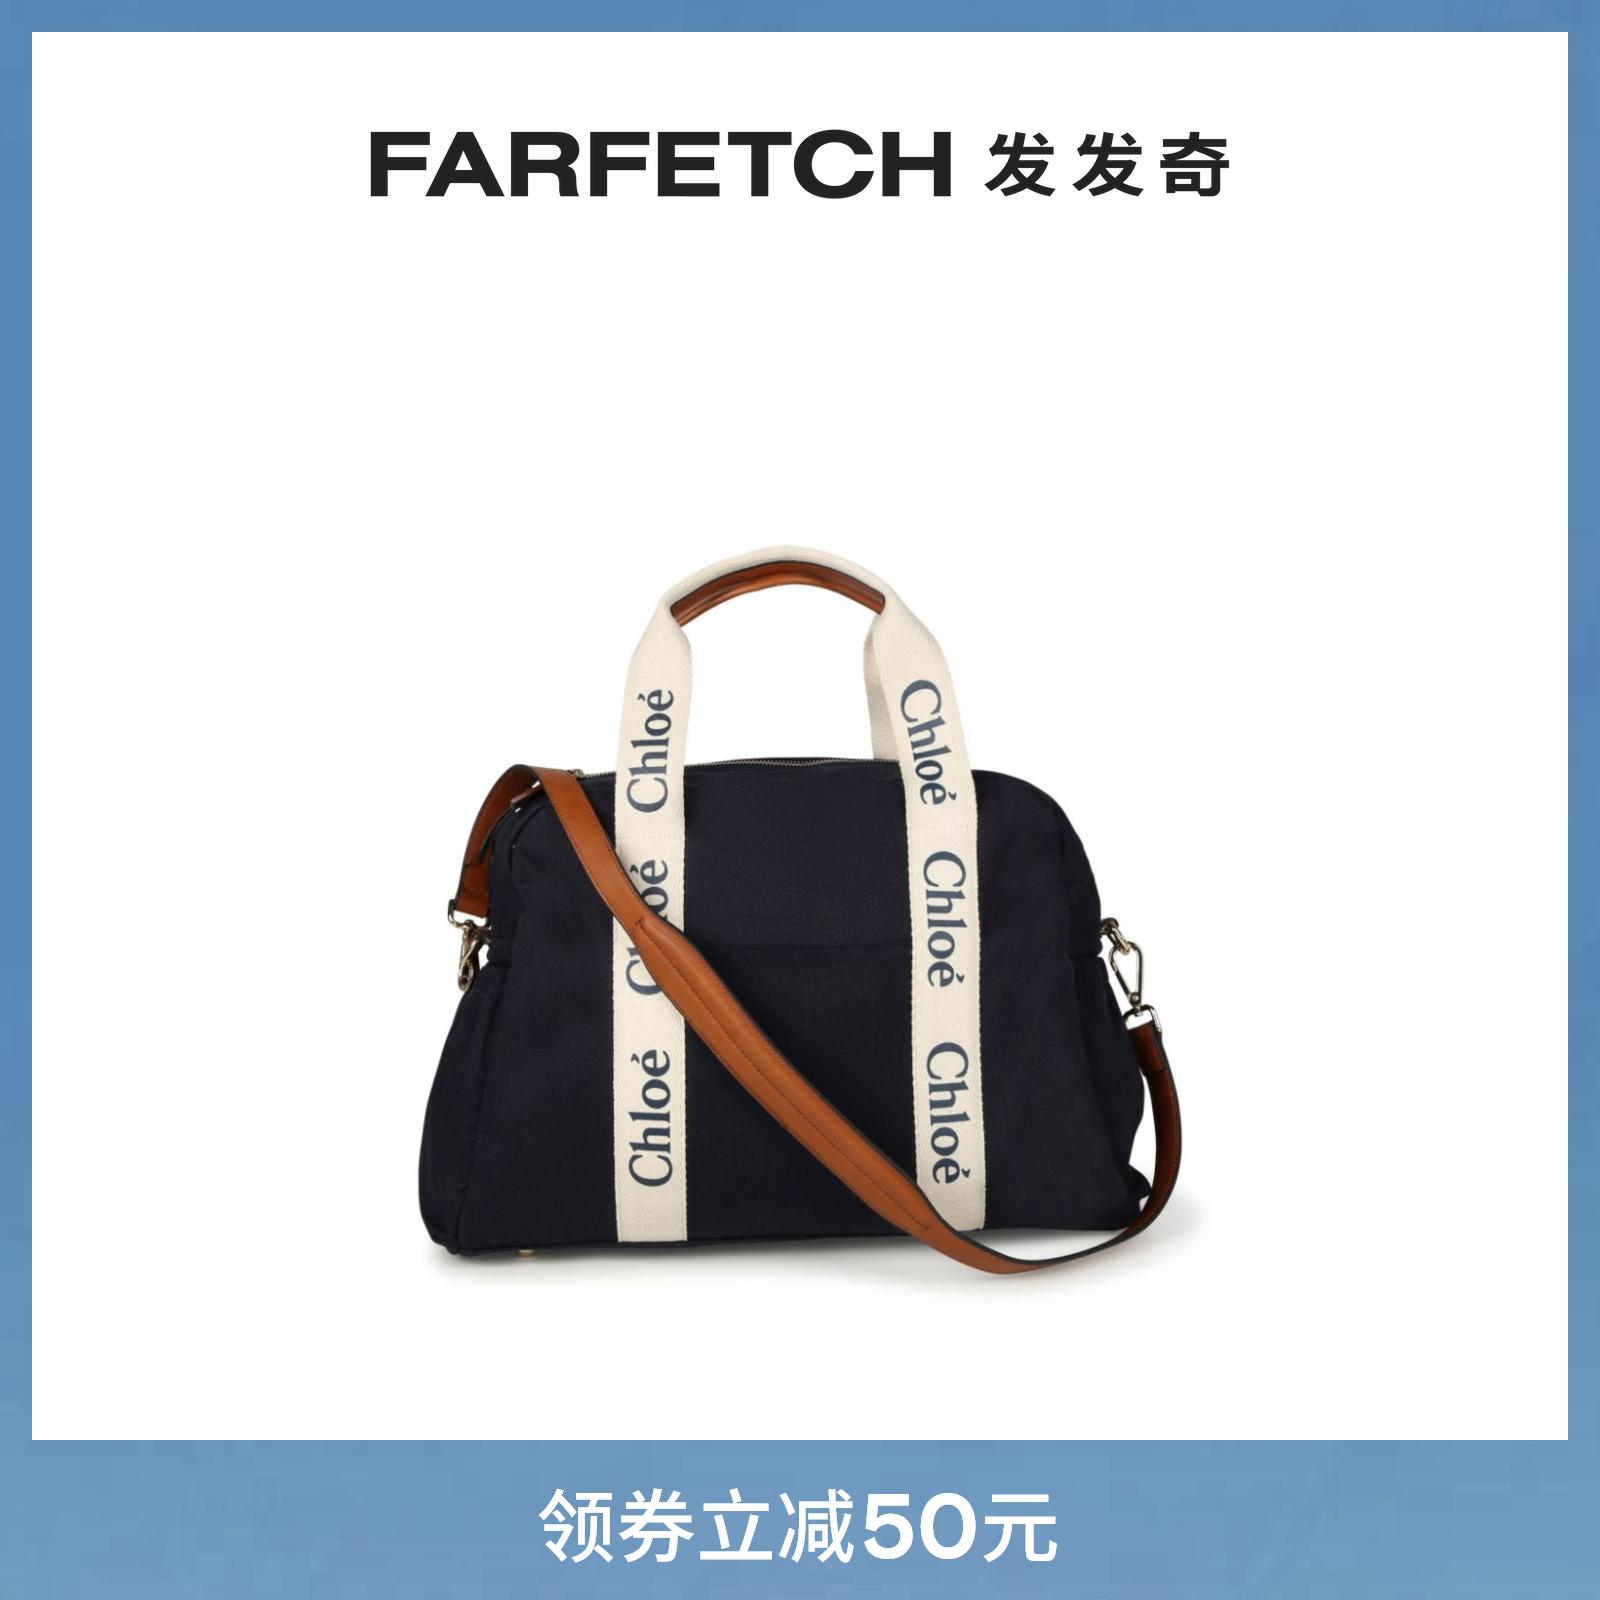 Chloé children's clothing logo printed cotton mother-to-baby bag FARFETCH Fat Chic-Taobao